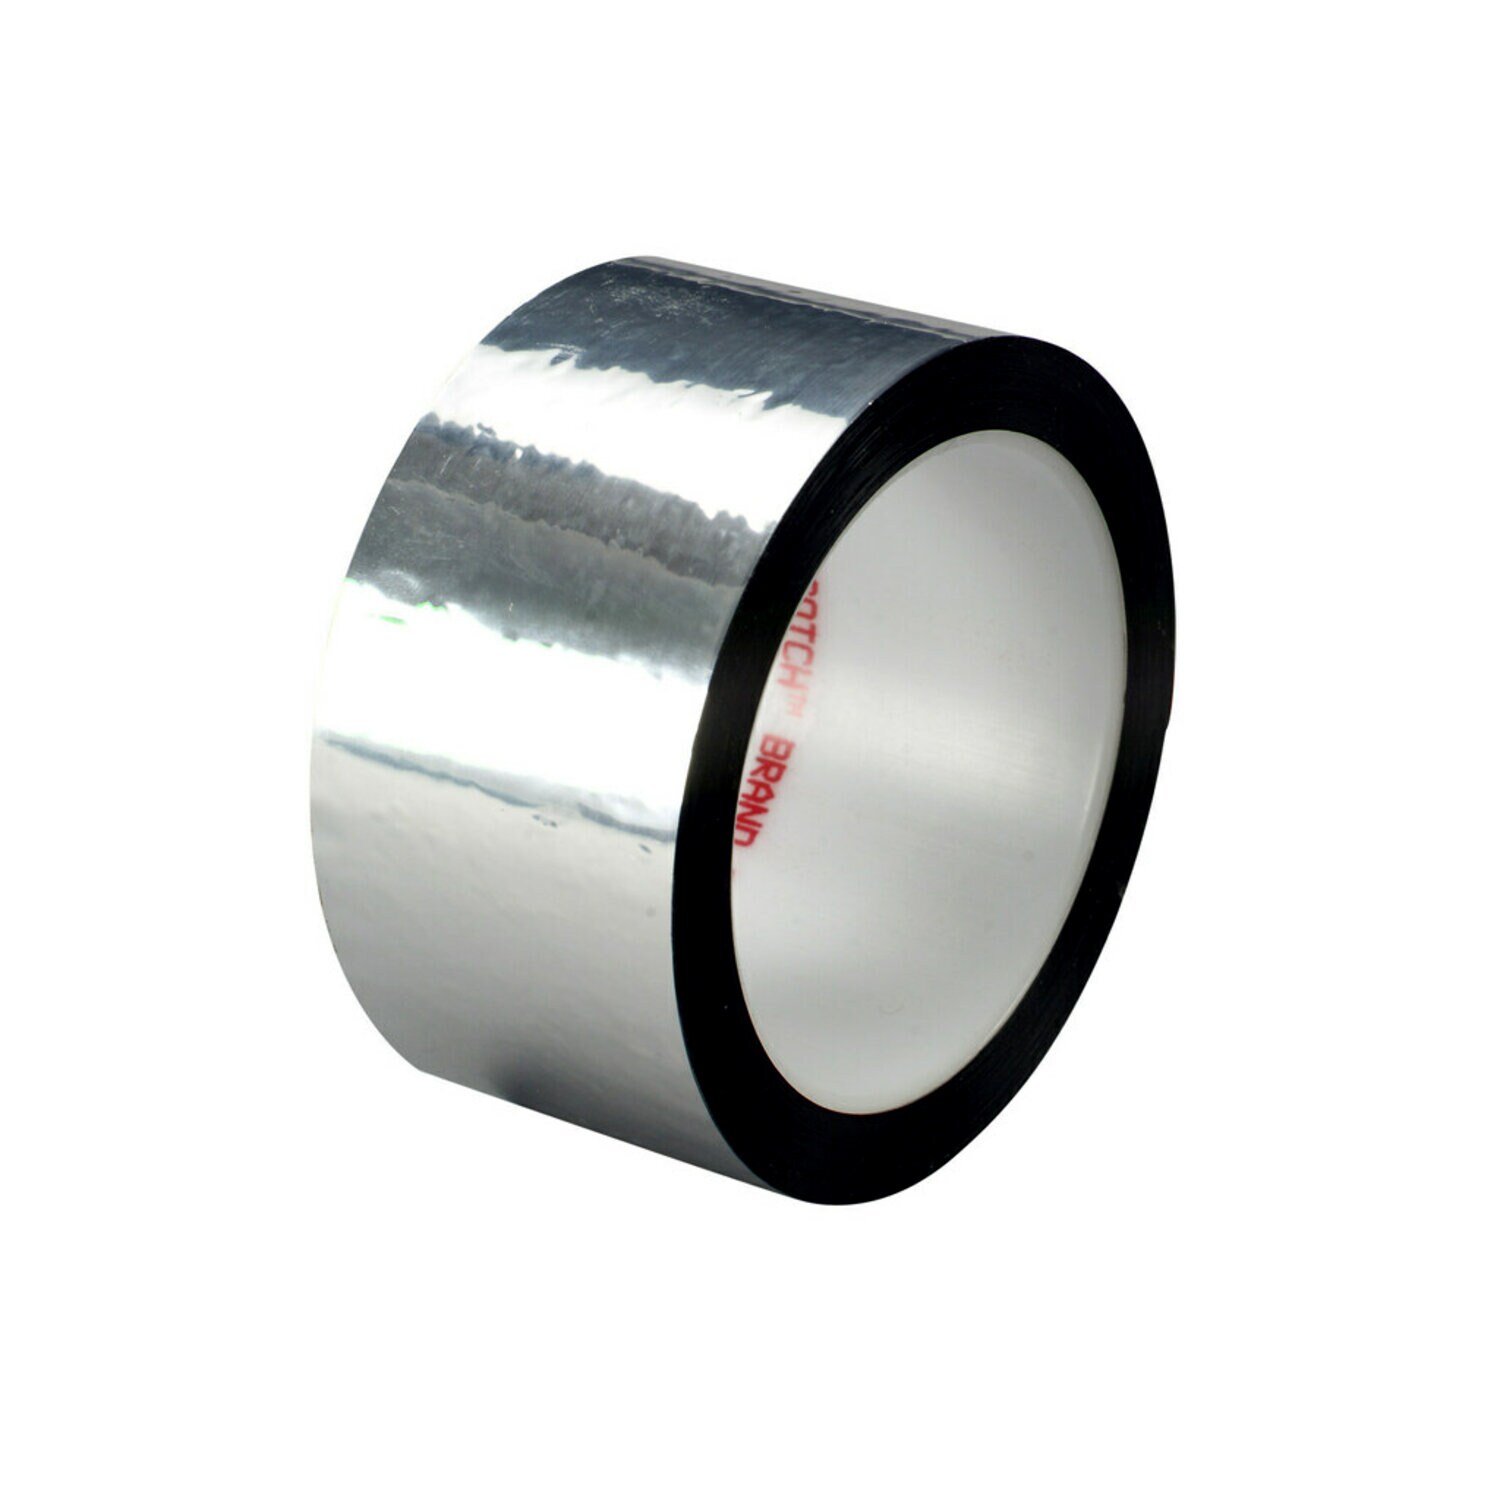 7100069442 - 3M Polyester Film Tape 850, Silver, 24 in x 72 yd, 1.9 mil, 1 roll per
case